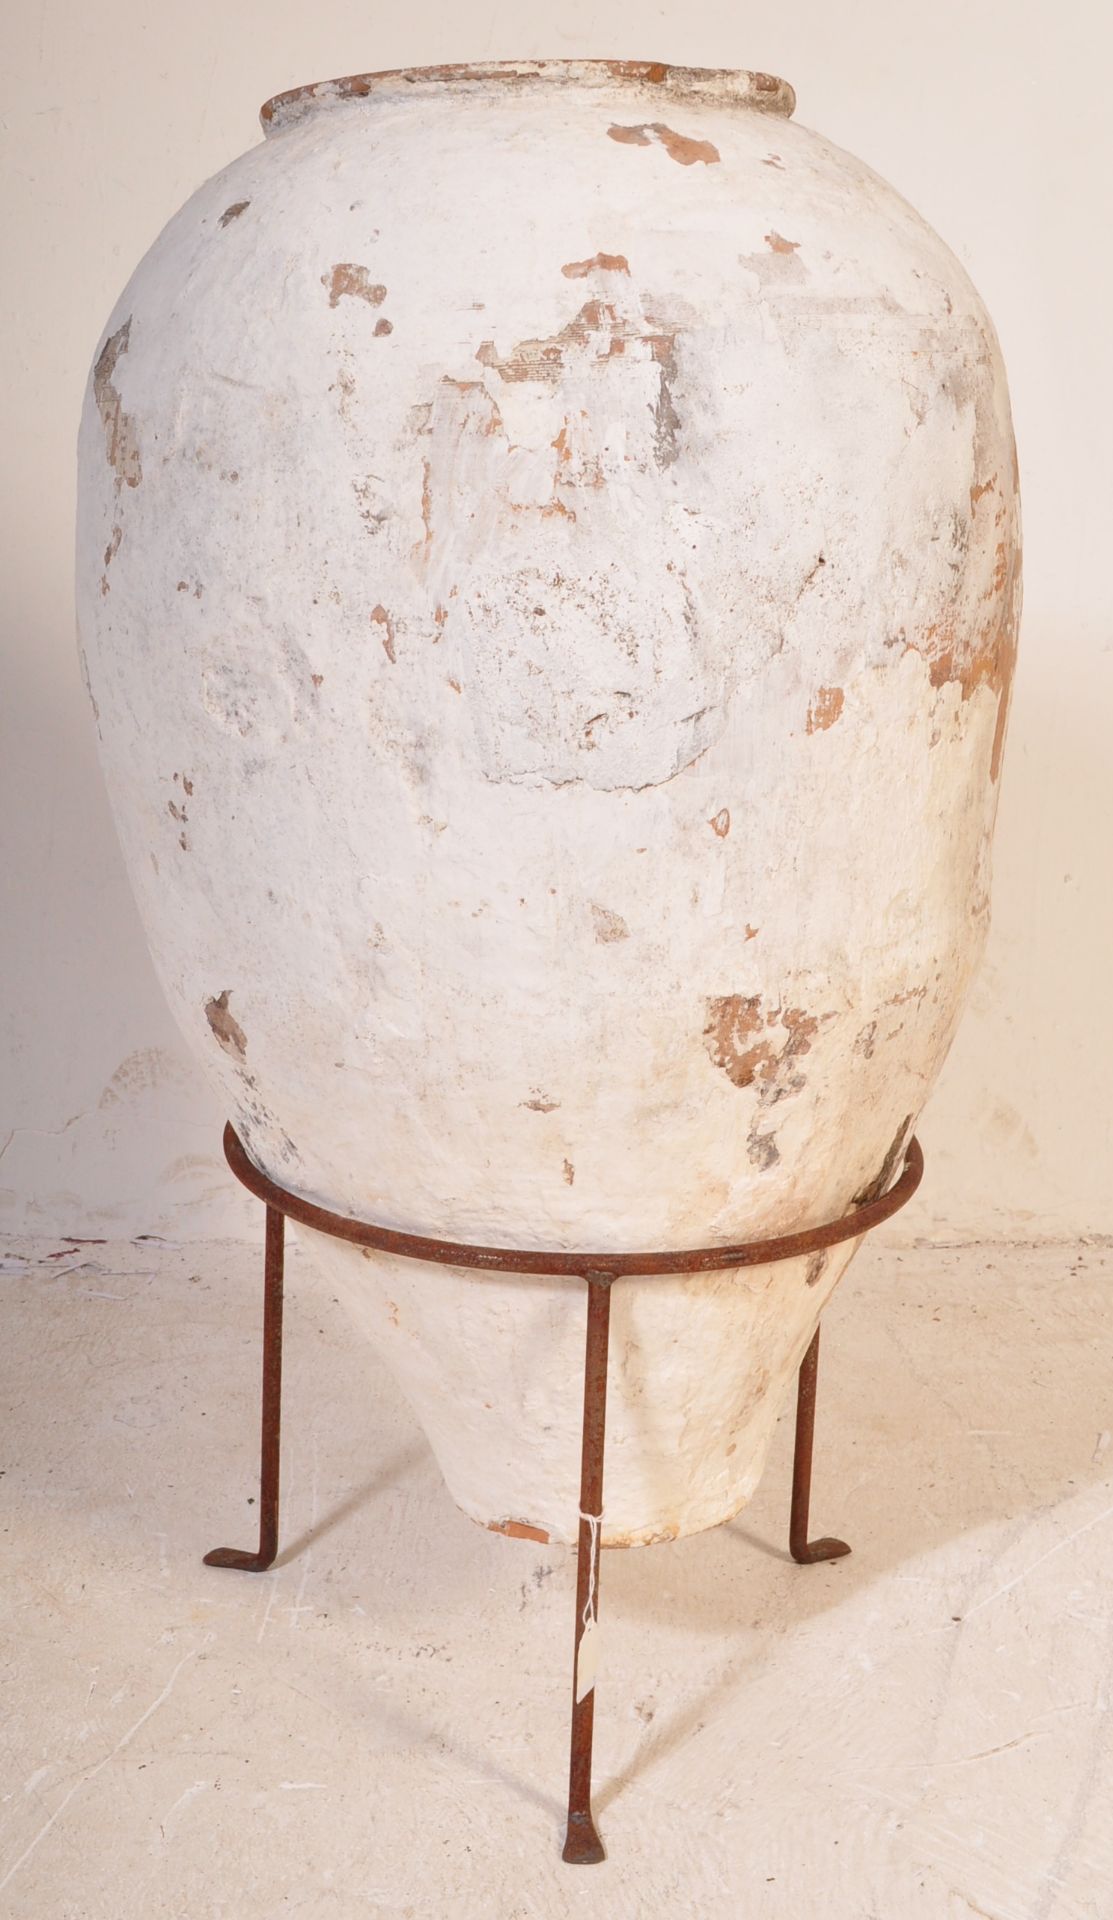 LARGE 20TH CENTURY WHITE PAINTED TERRACOTTA OLIVE JAR